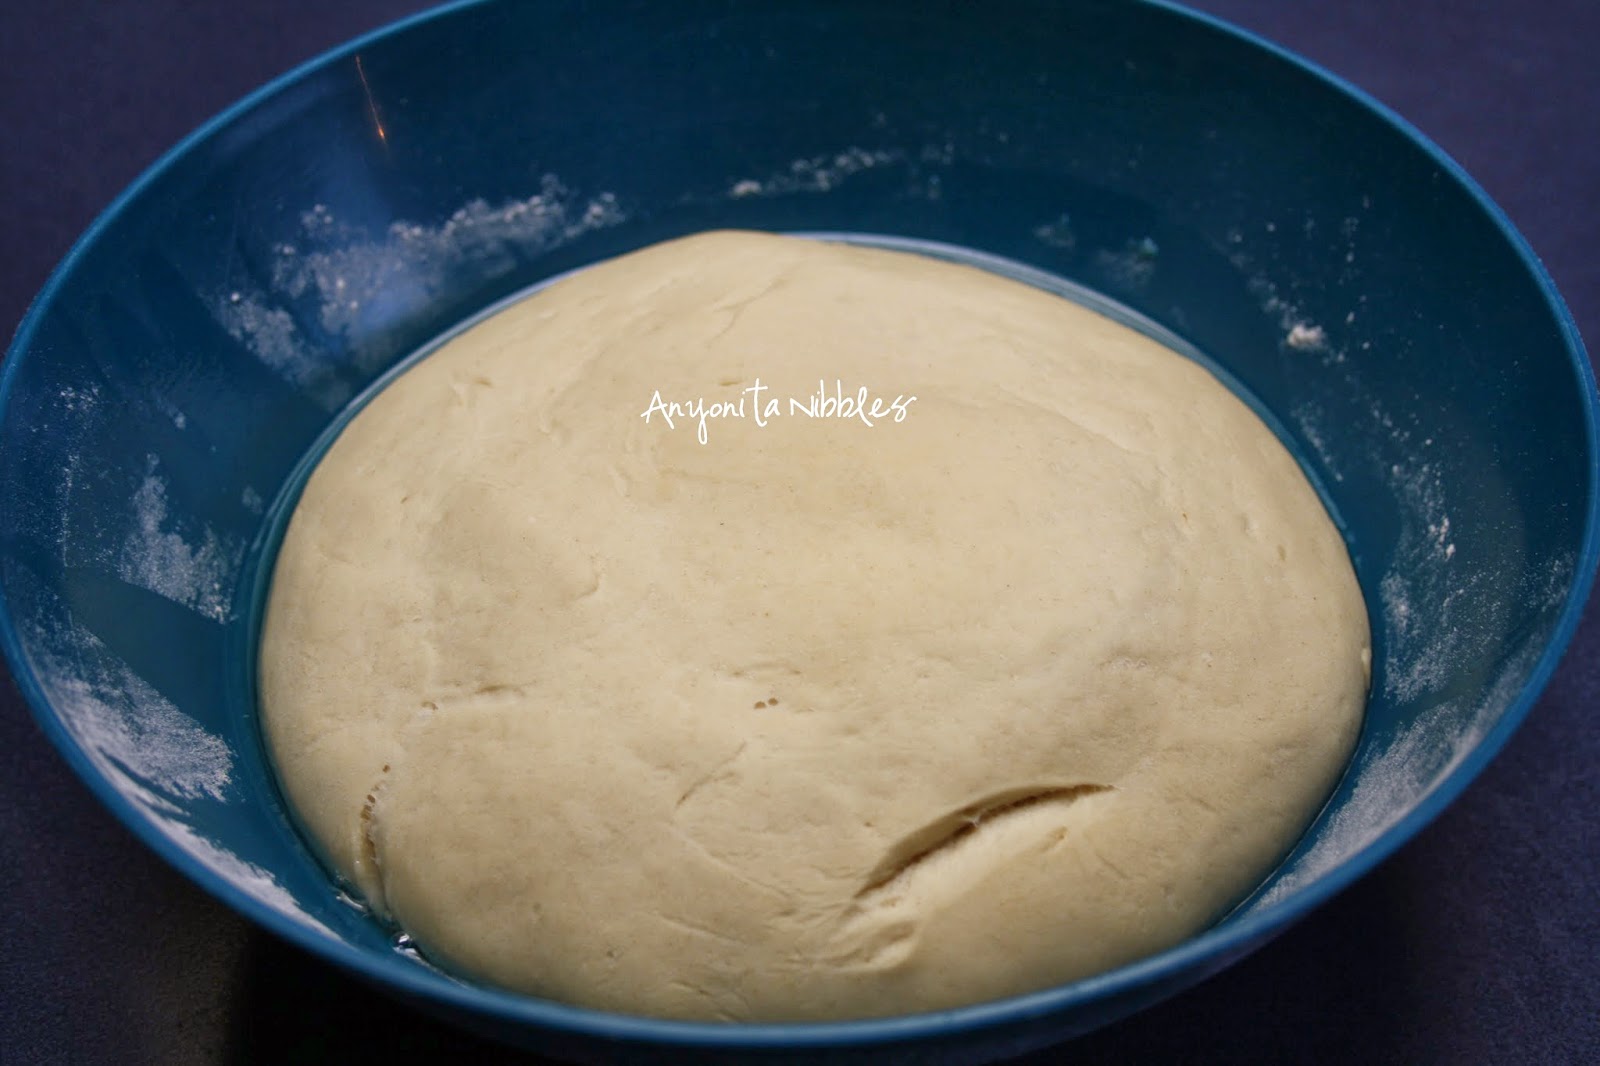 Allow the dough to expand to twice its size